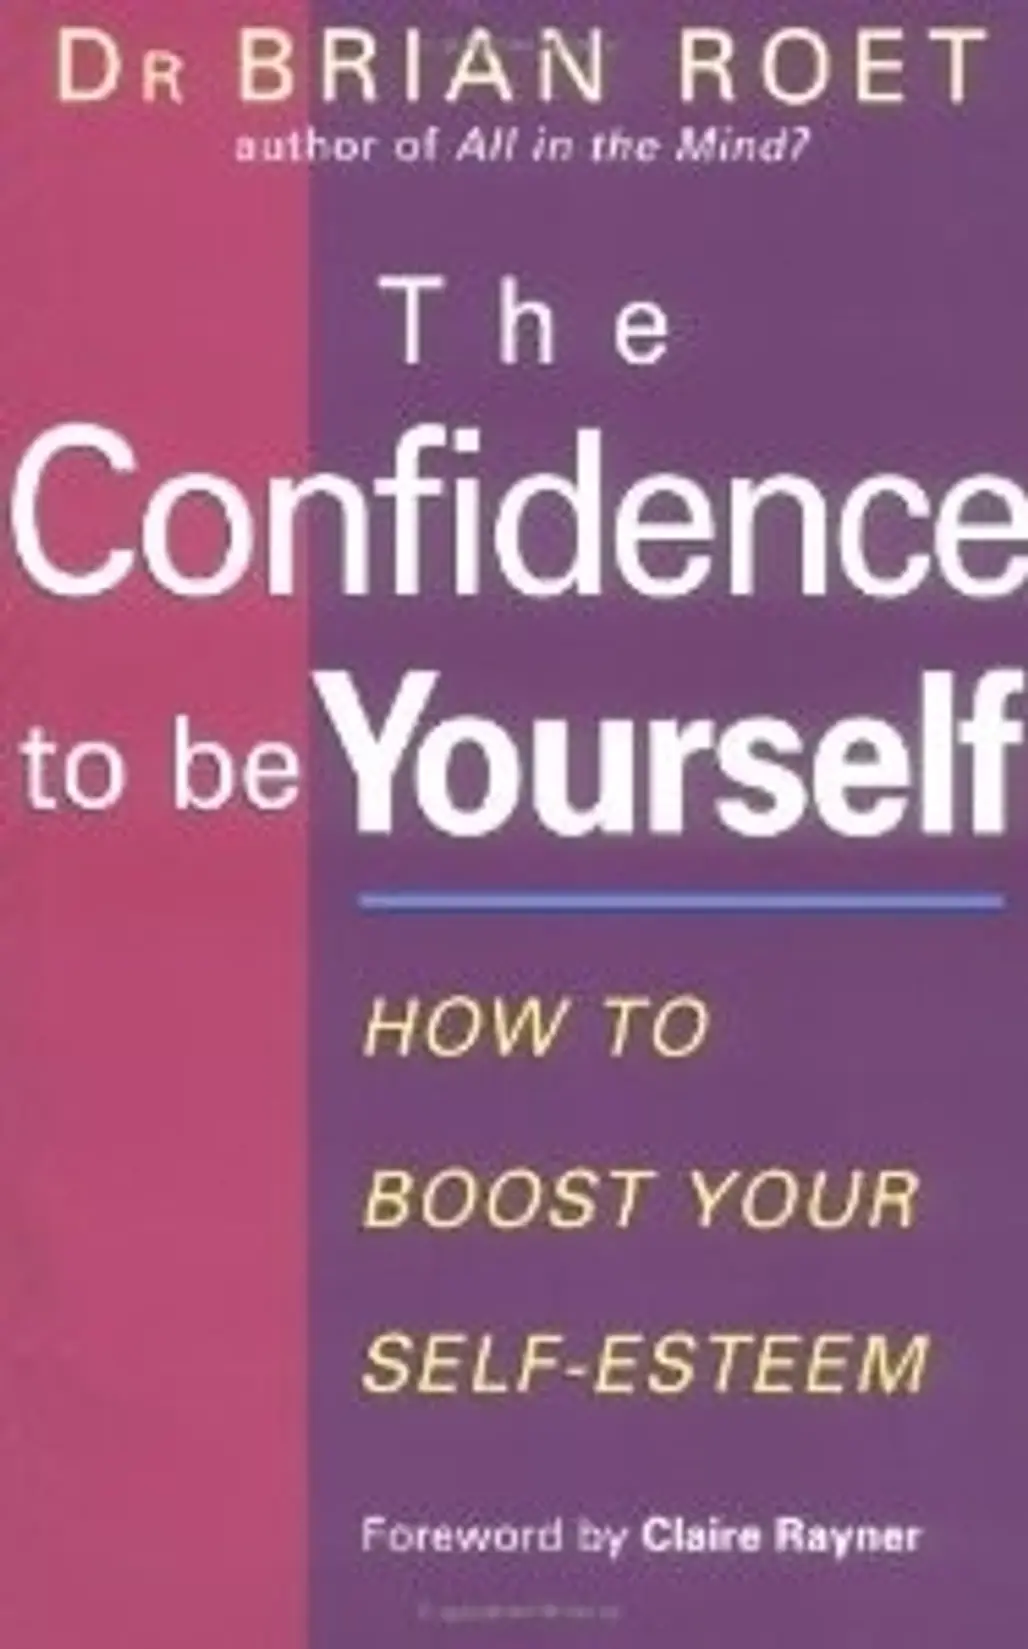 Brian Roet - the Confidence to Be Yourself